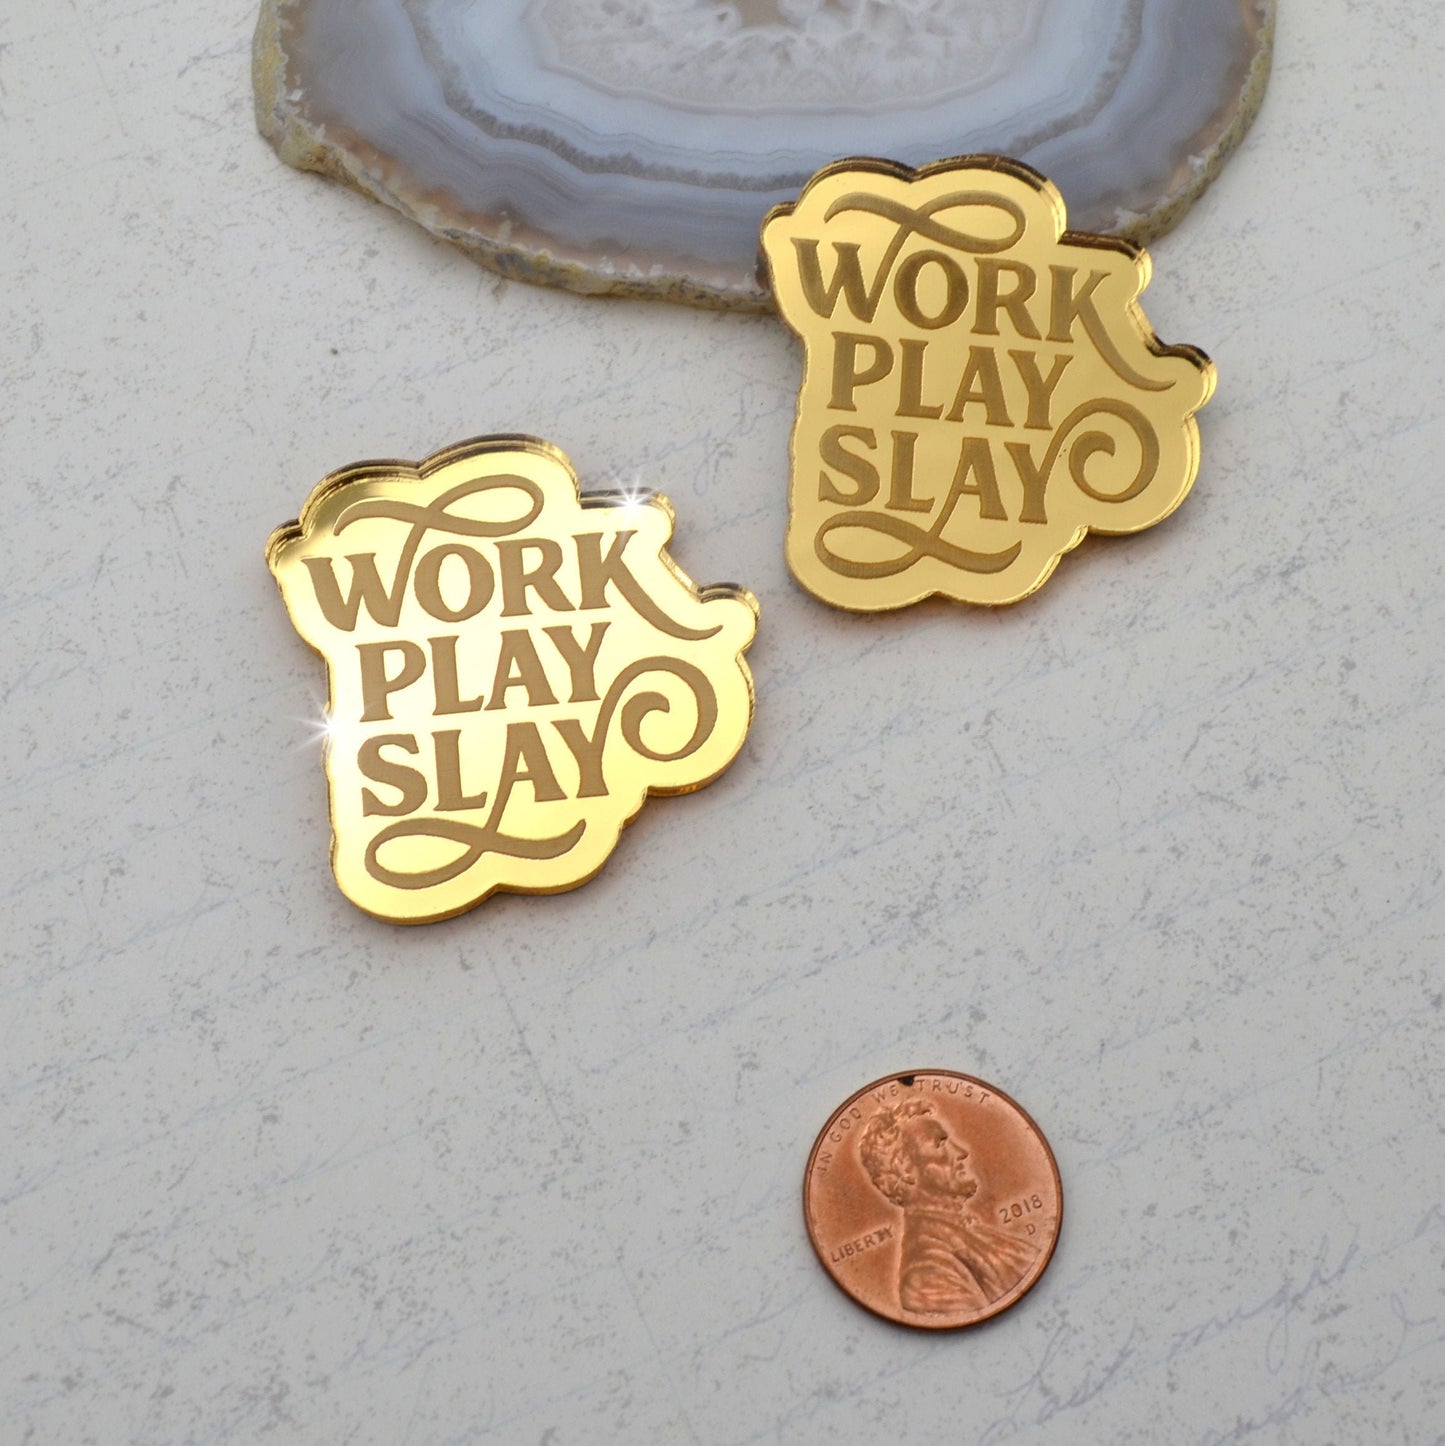 WORK PLAY SLAY - Cabochons- Gold Mirror Laser Cut Acrylic Cabs - Set of 2